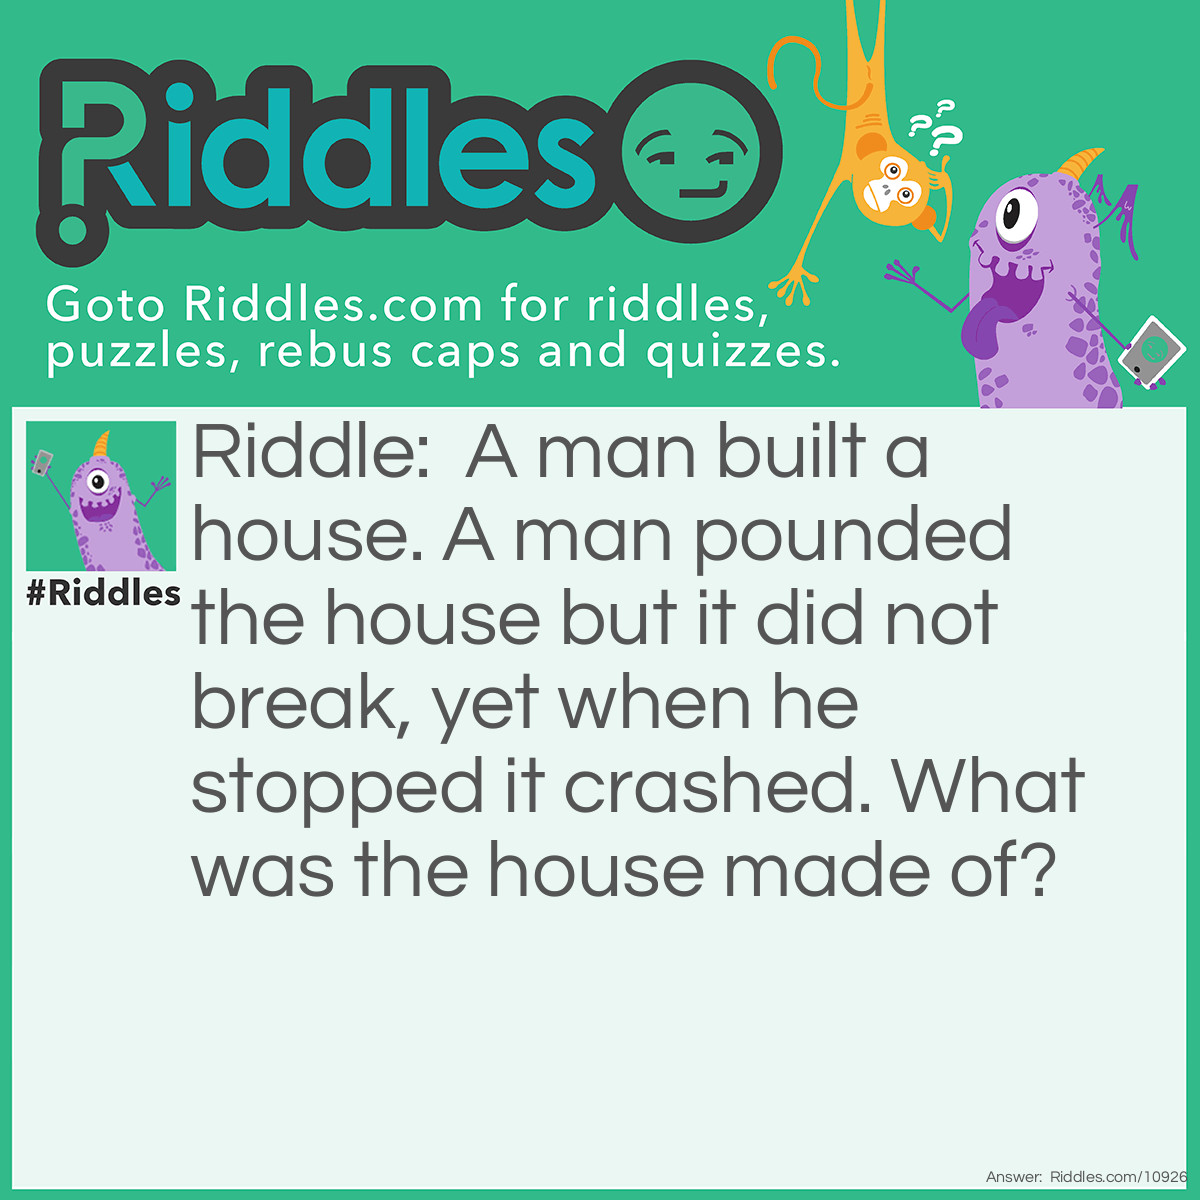 Riddle: A man built a house. A man pounded the house but it did not break, yet when he stopped it crashed. What was the house made of? Answer: Oobleck.